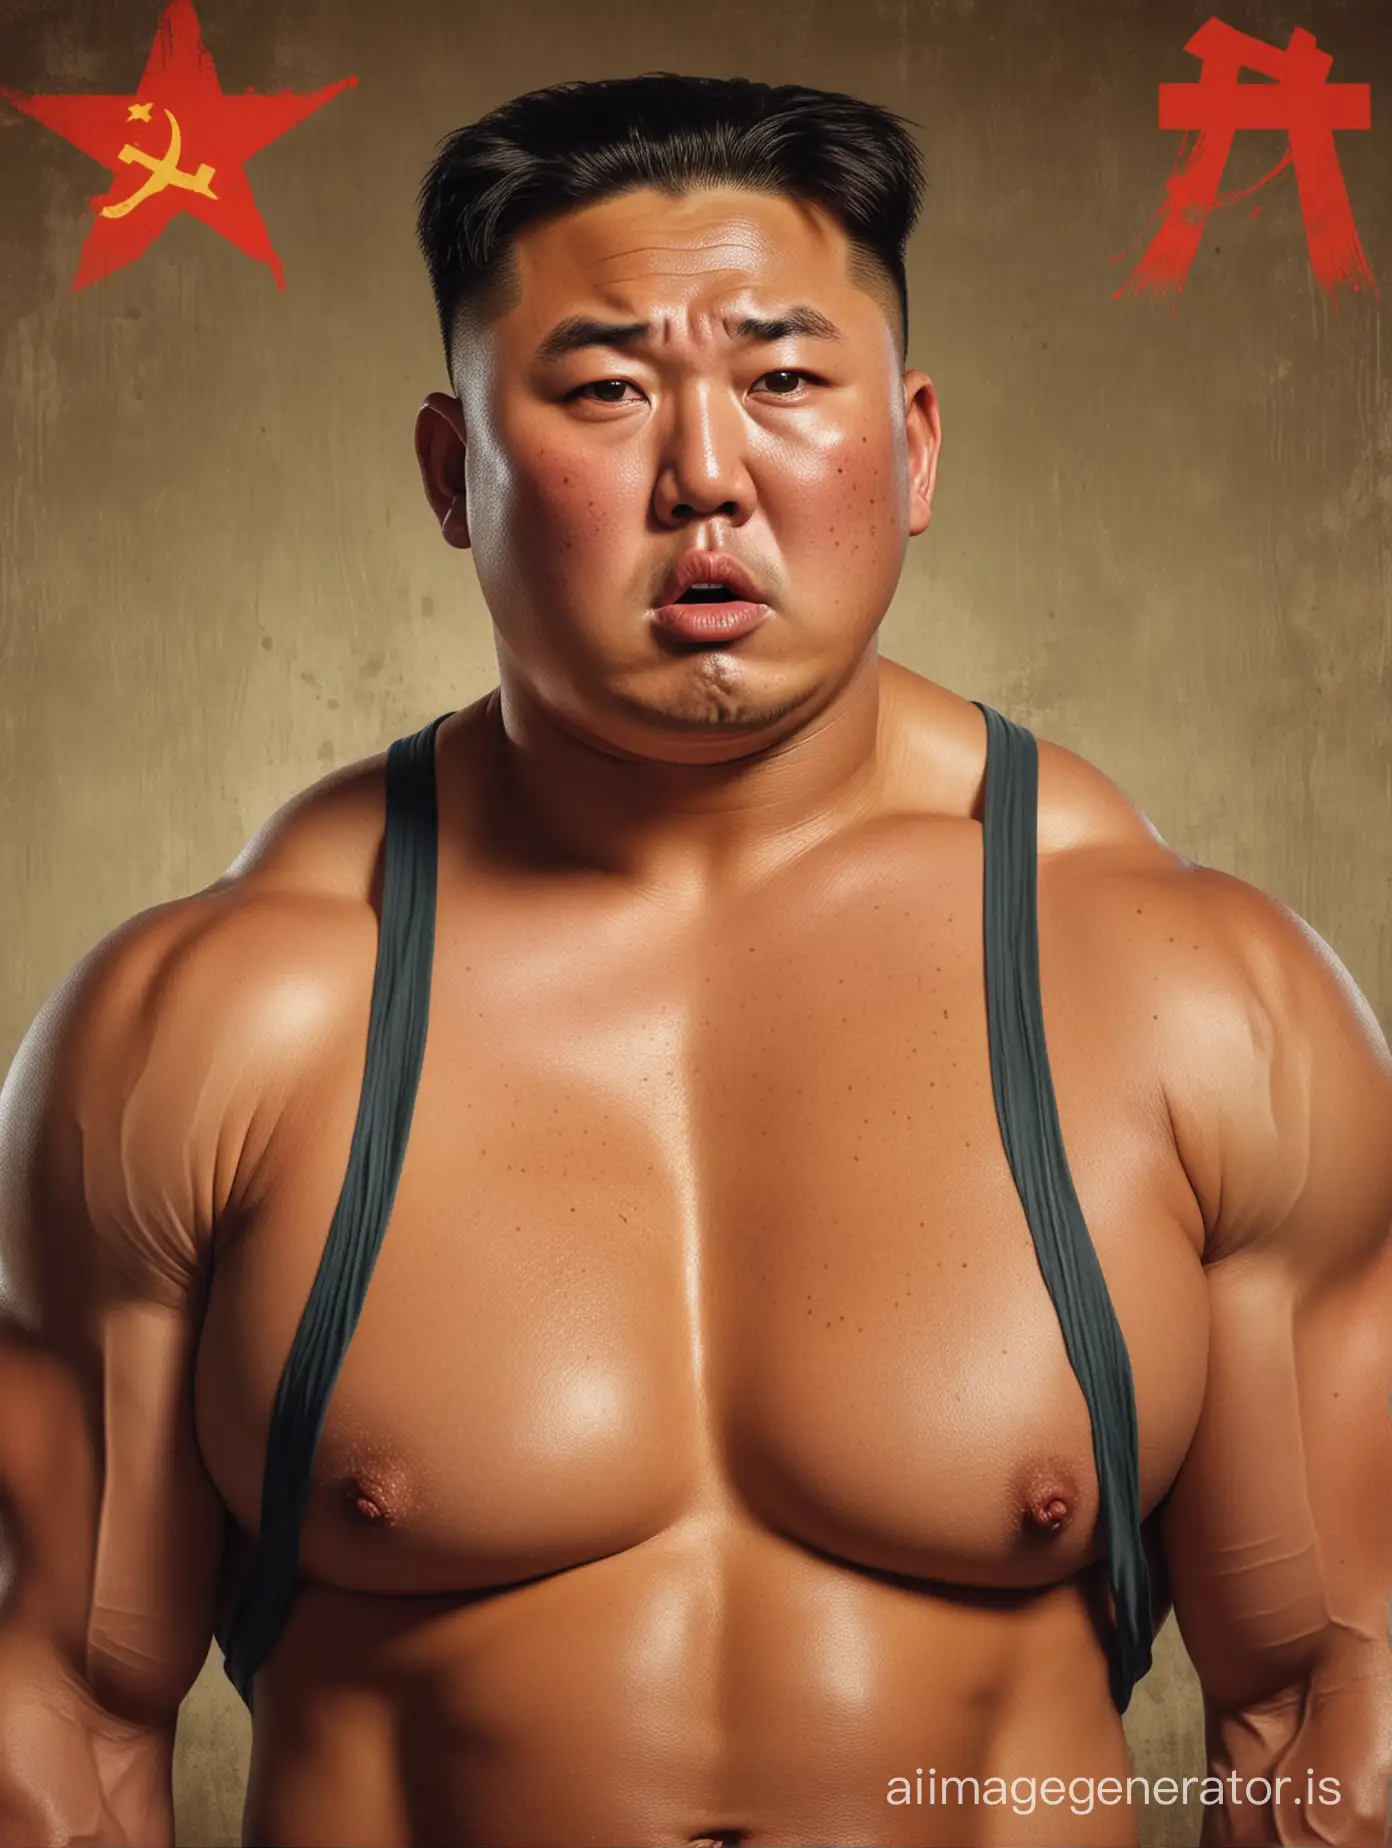 a muscular bodybuilder Kim jong un with a dramatic look of worry on his face, sweating, in the style of a communist poster